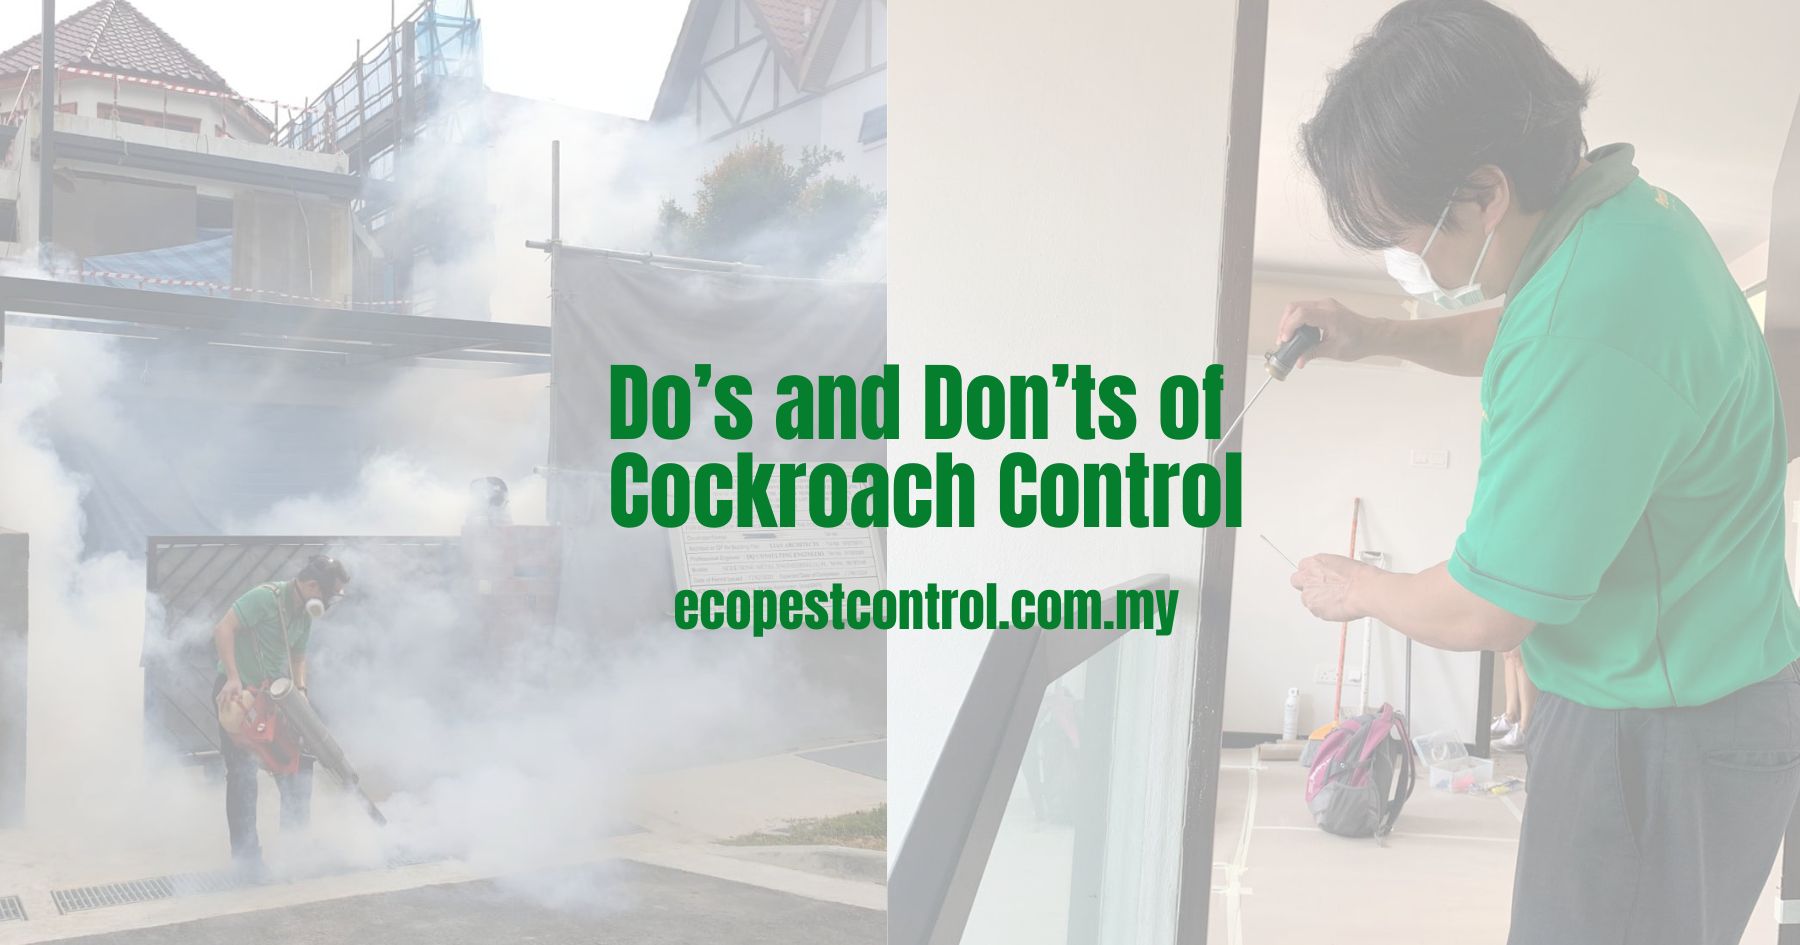 Do’s and Don’ts of Cockroach Control